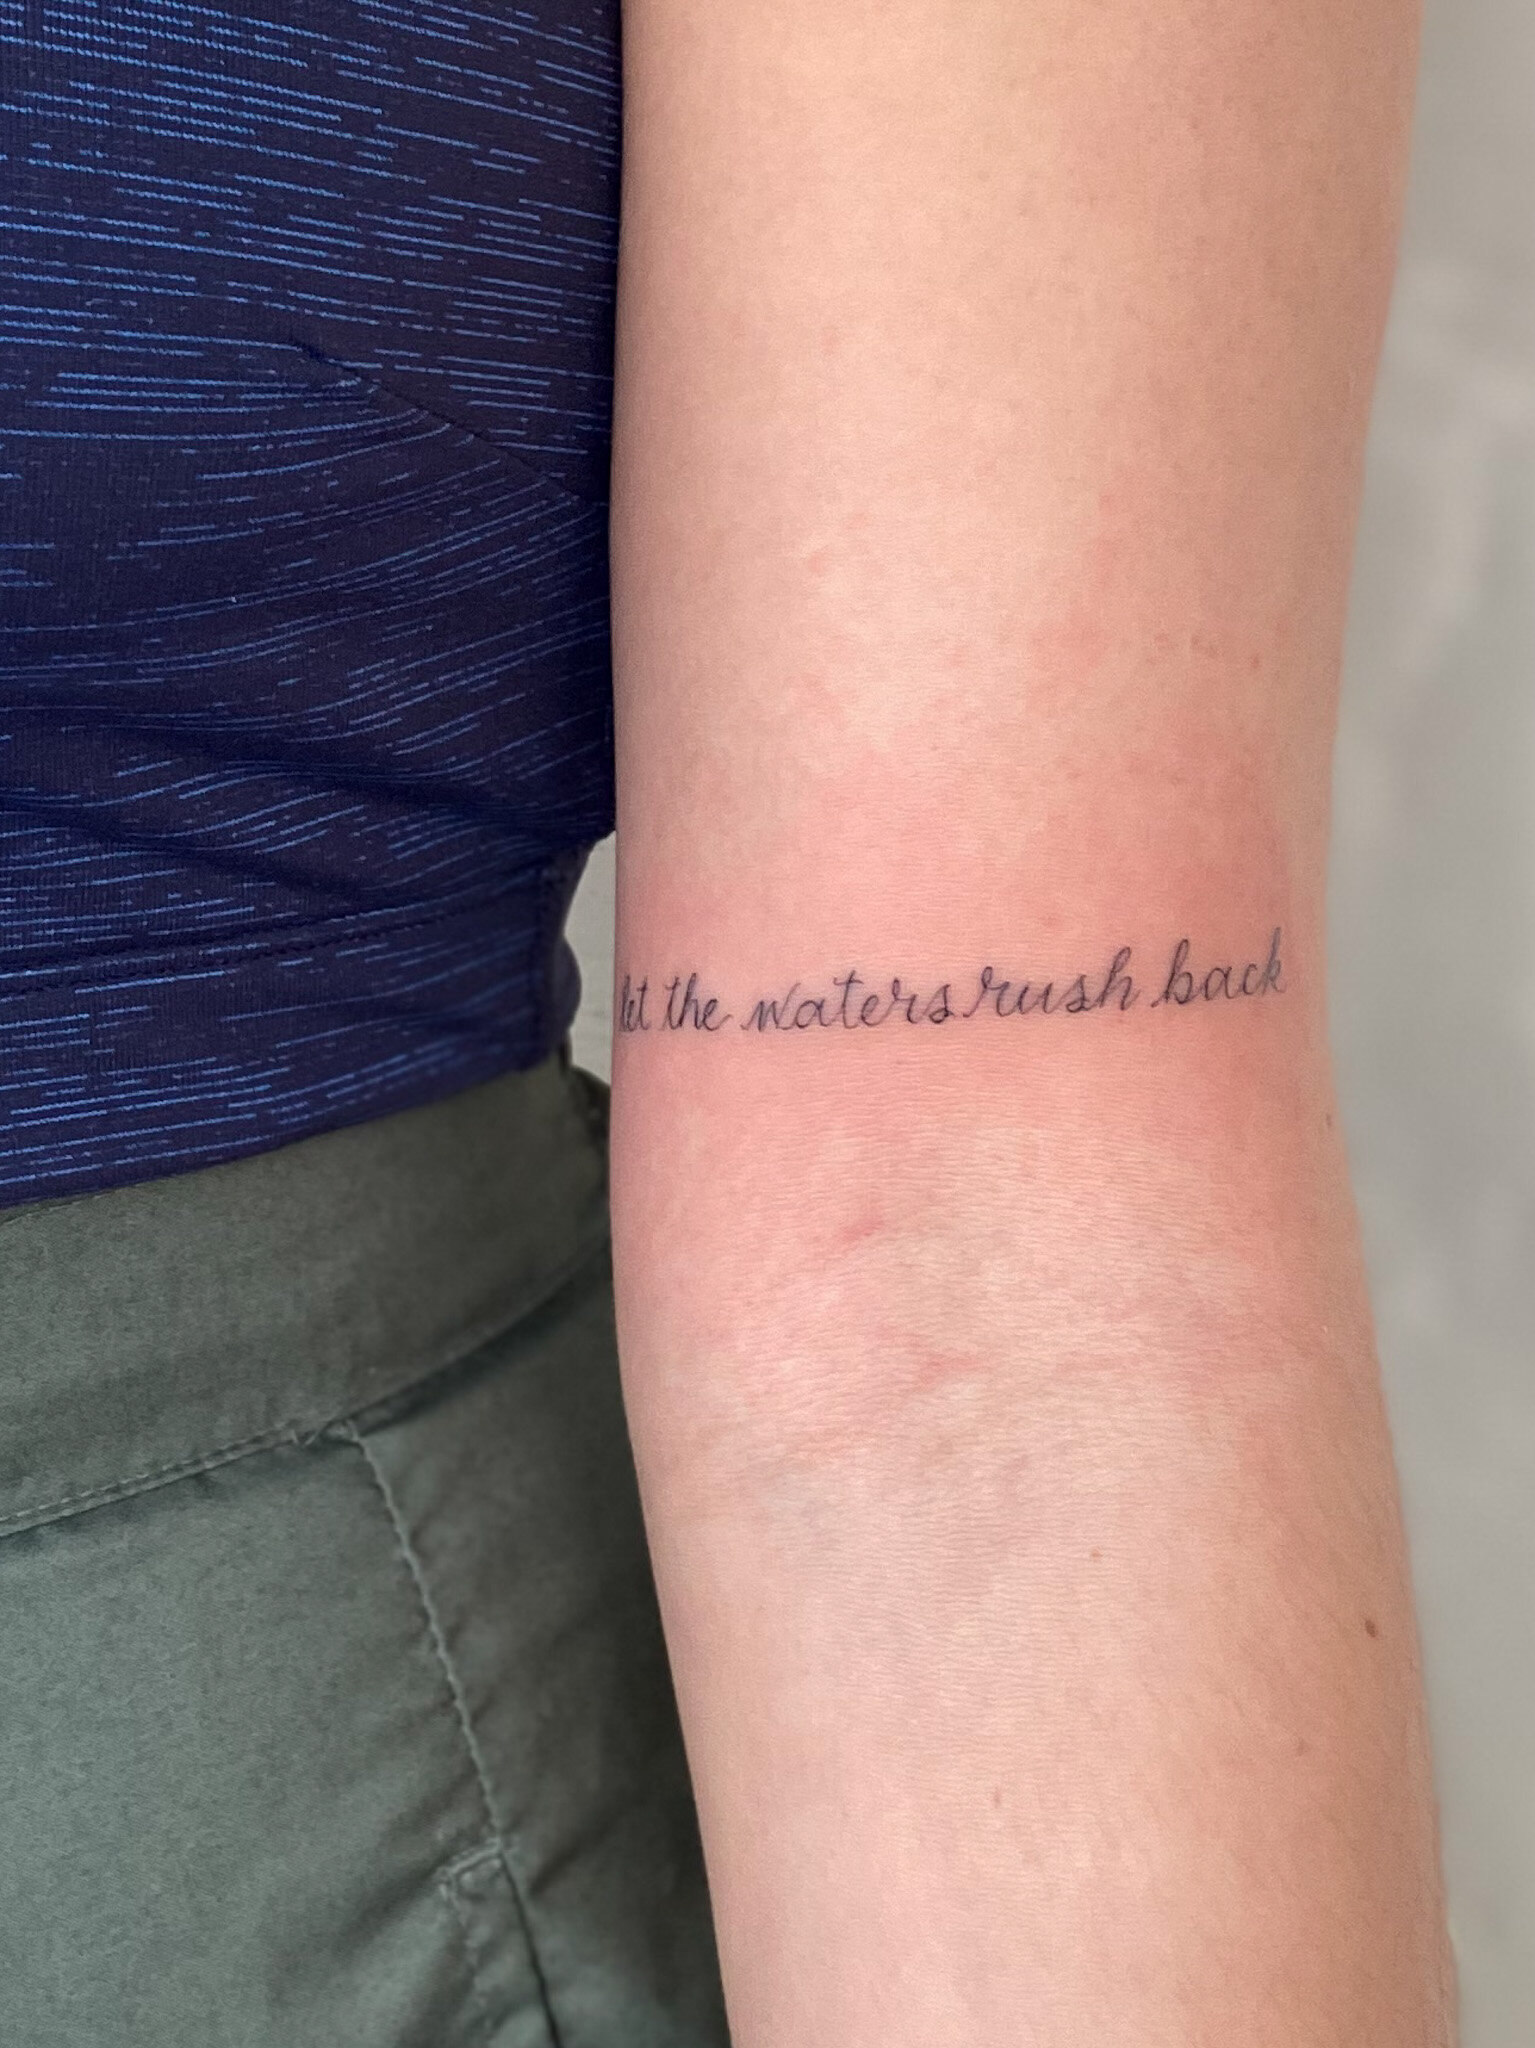  "Let the waters rush back." script tattoo 